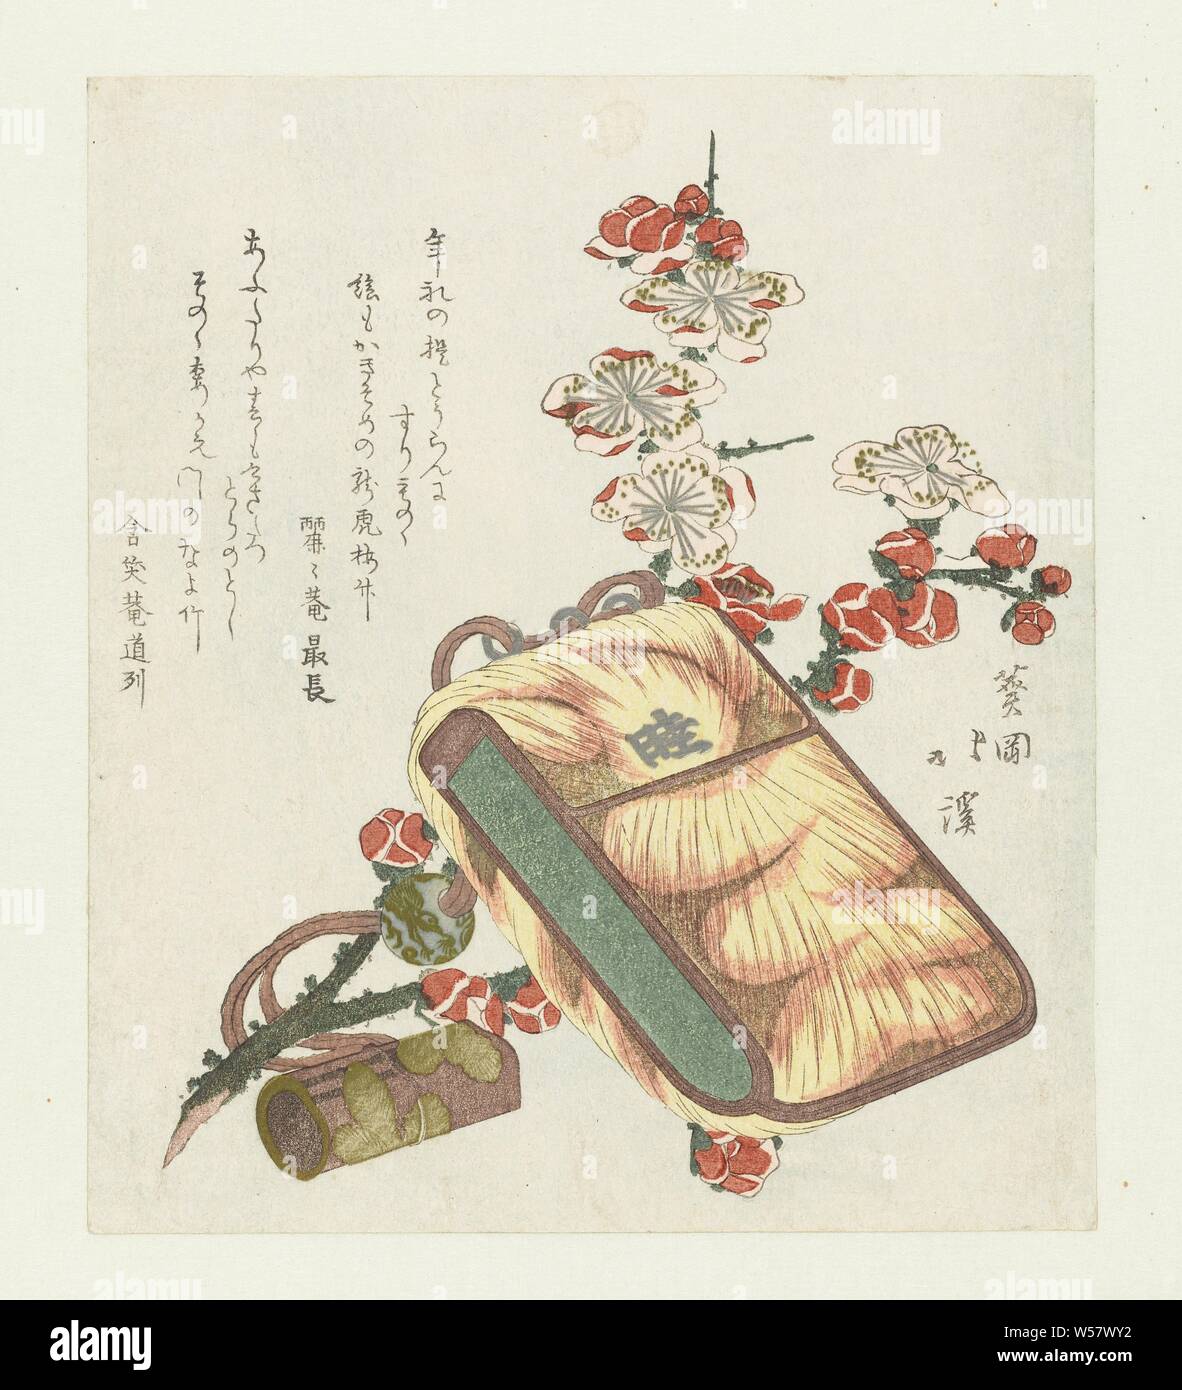 Tobacco pouch with belt knot and plum blossom, A plum blossom branch and a tobacco pouch made of tiger skin, with a glass bead and belt knot (netsuke) made of varnished bamboo. This print was made for the new year of the tiger. With two poems, plants, vegetation (flowers, blossom, blossoming), Totoya Hokkei (mentioned on object), Japan, 1818, paper, colour woodcut, h 208 mm × w 181 mm Stock Photo